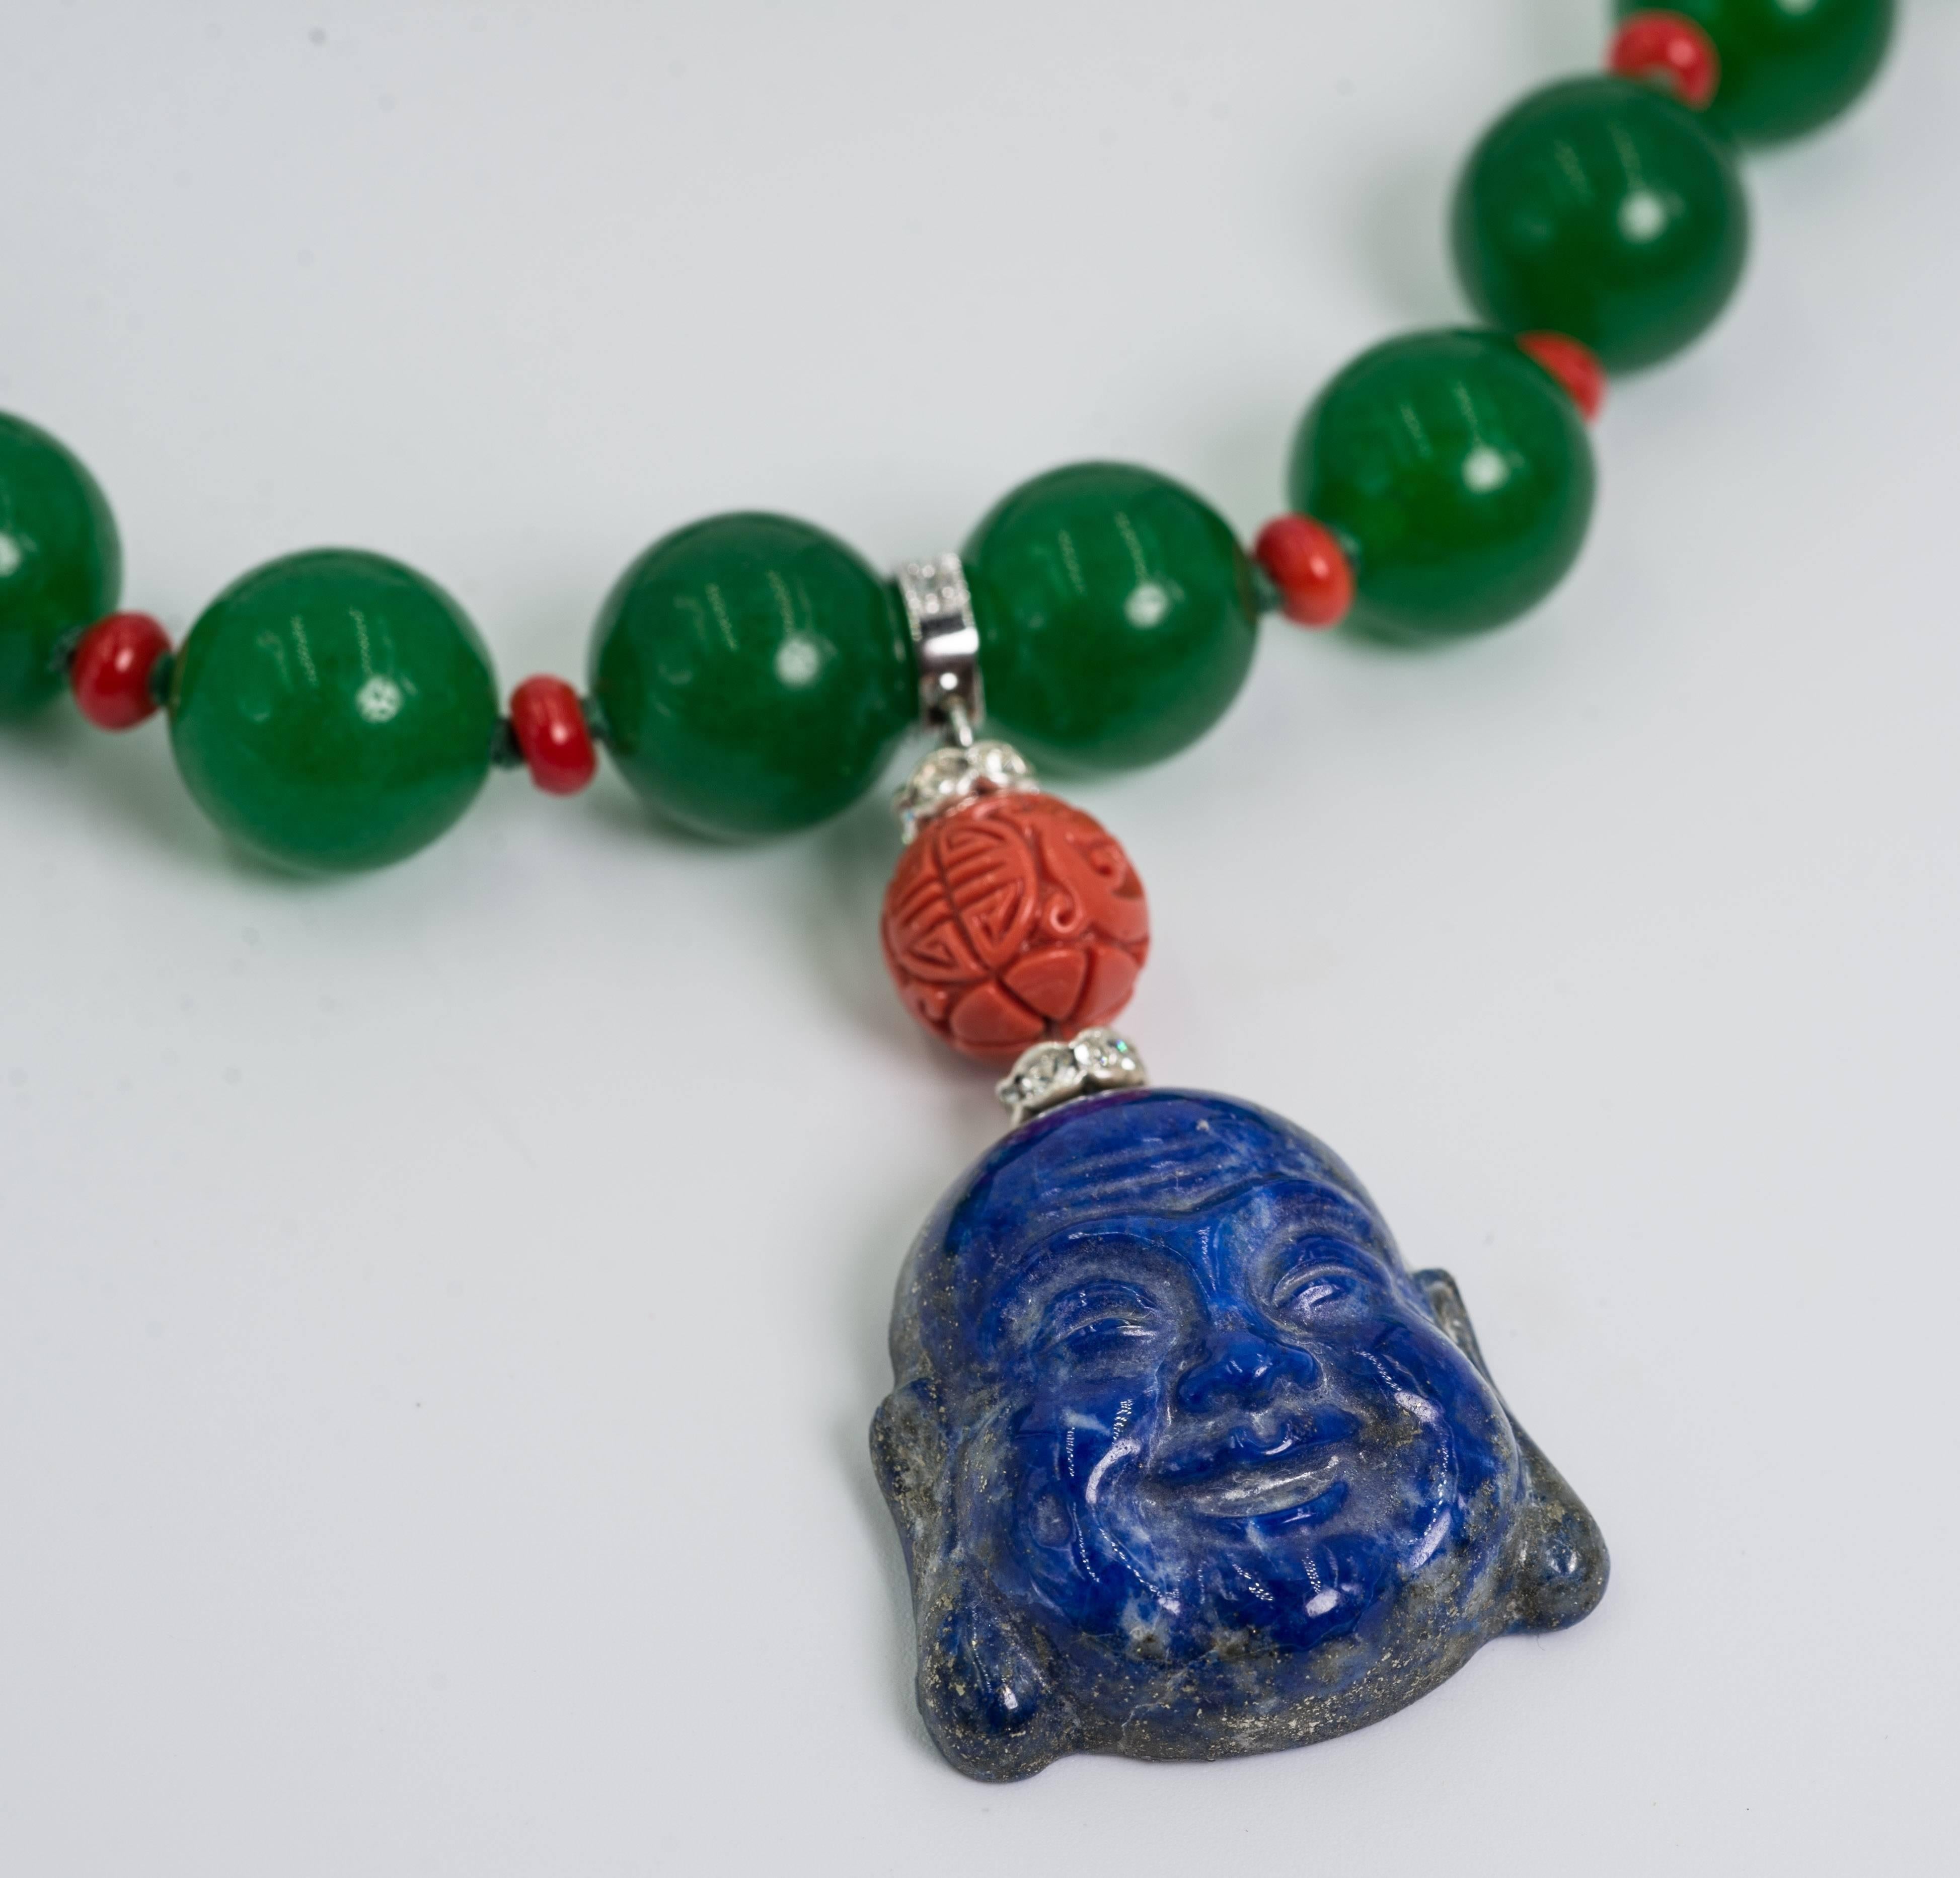 Fabulous faux Imperial jade bead coral real lapis lazuli Happy Buddha necklace
one-of-a-kind beautifully made with chic and style.
The necklace fits an 18''neck and the Buddha pendant is 2'' long. Traditional pave ball clasp.